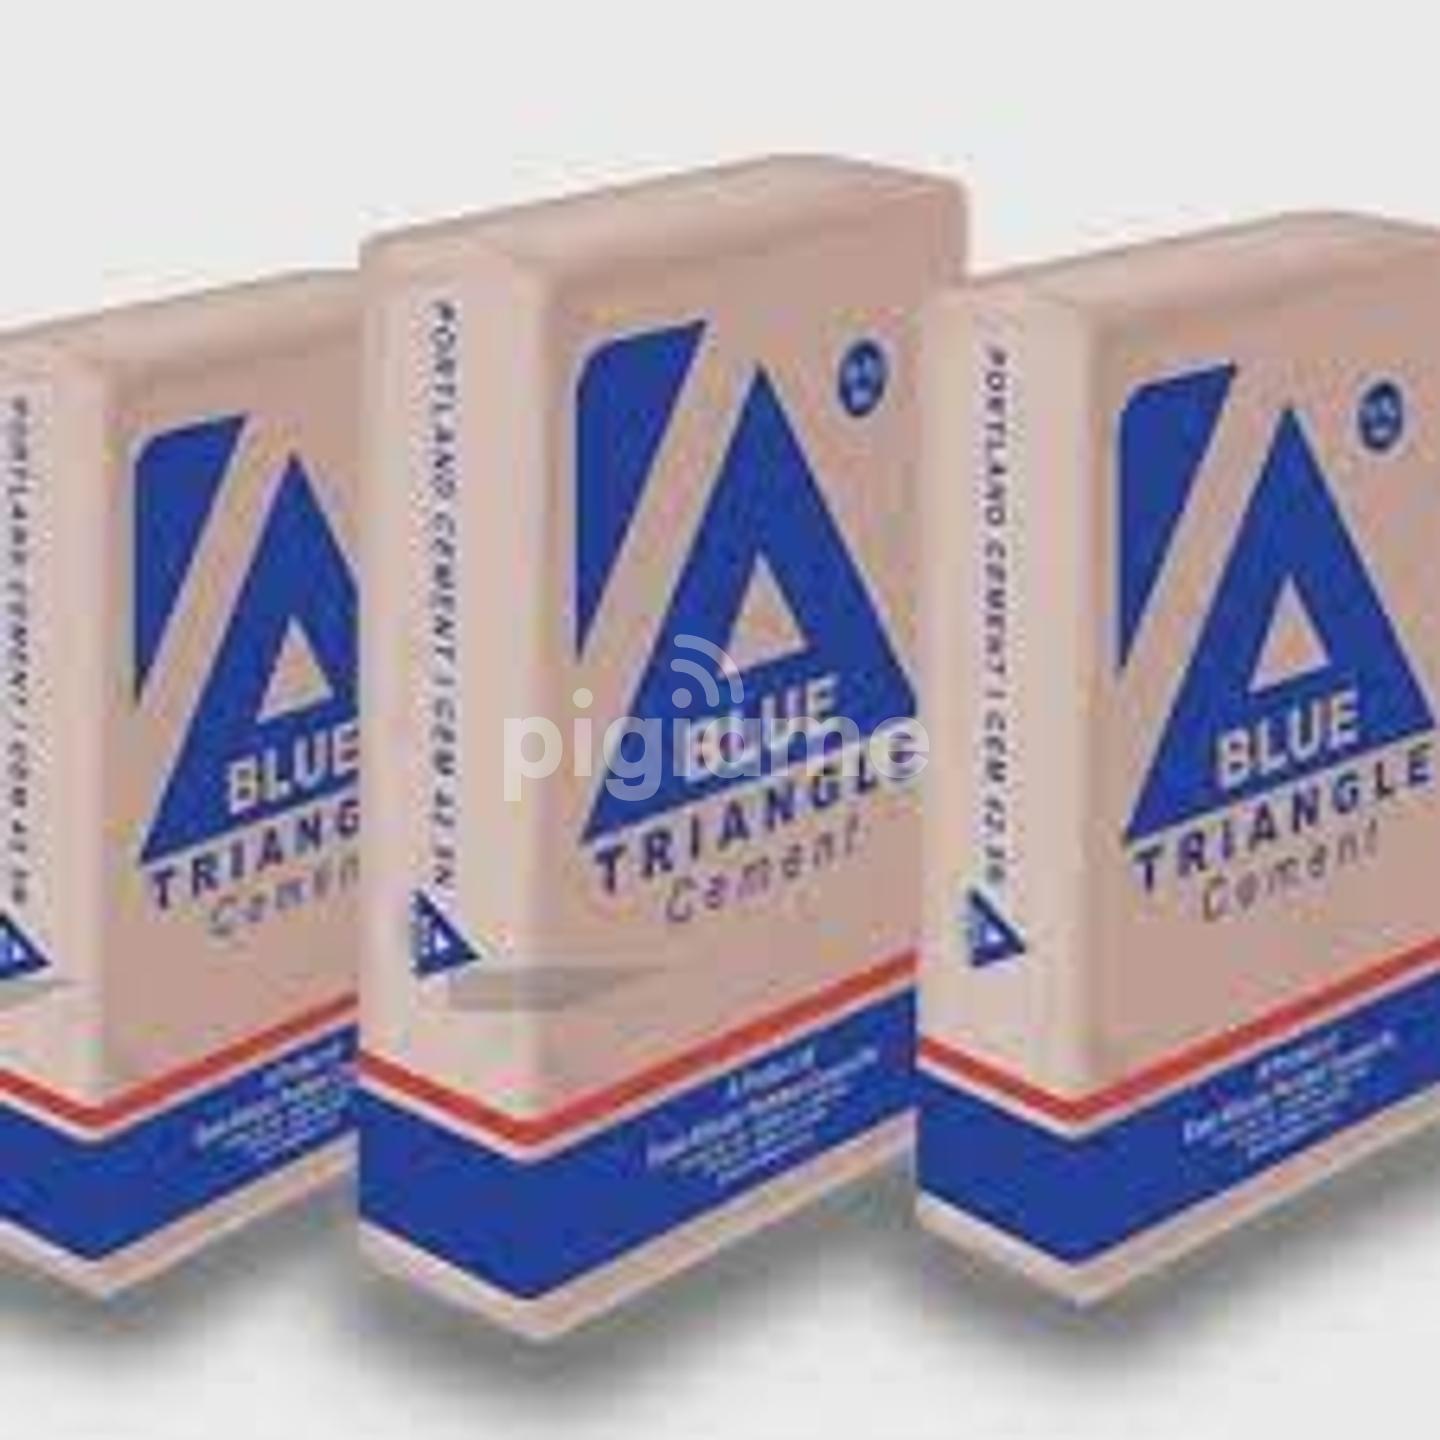 BLUE TRIANGLE CEMENT AT AN AFFORDABLE PRICE